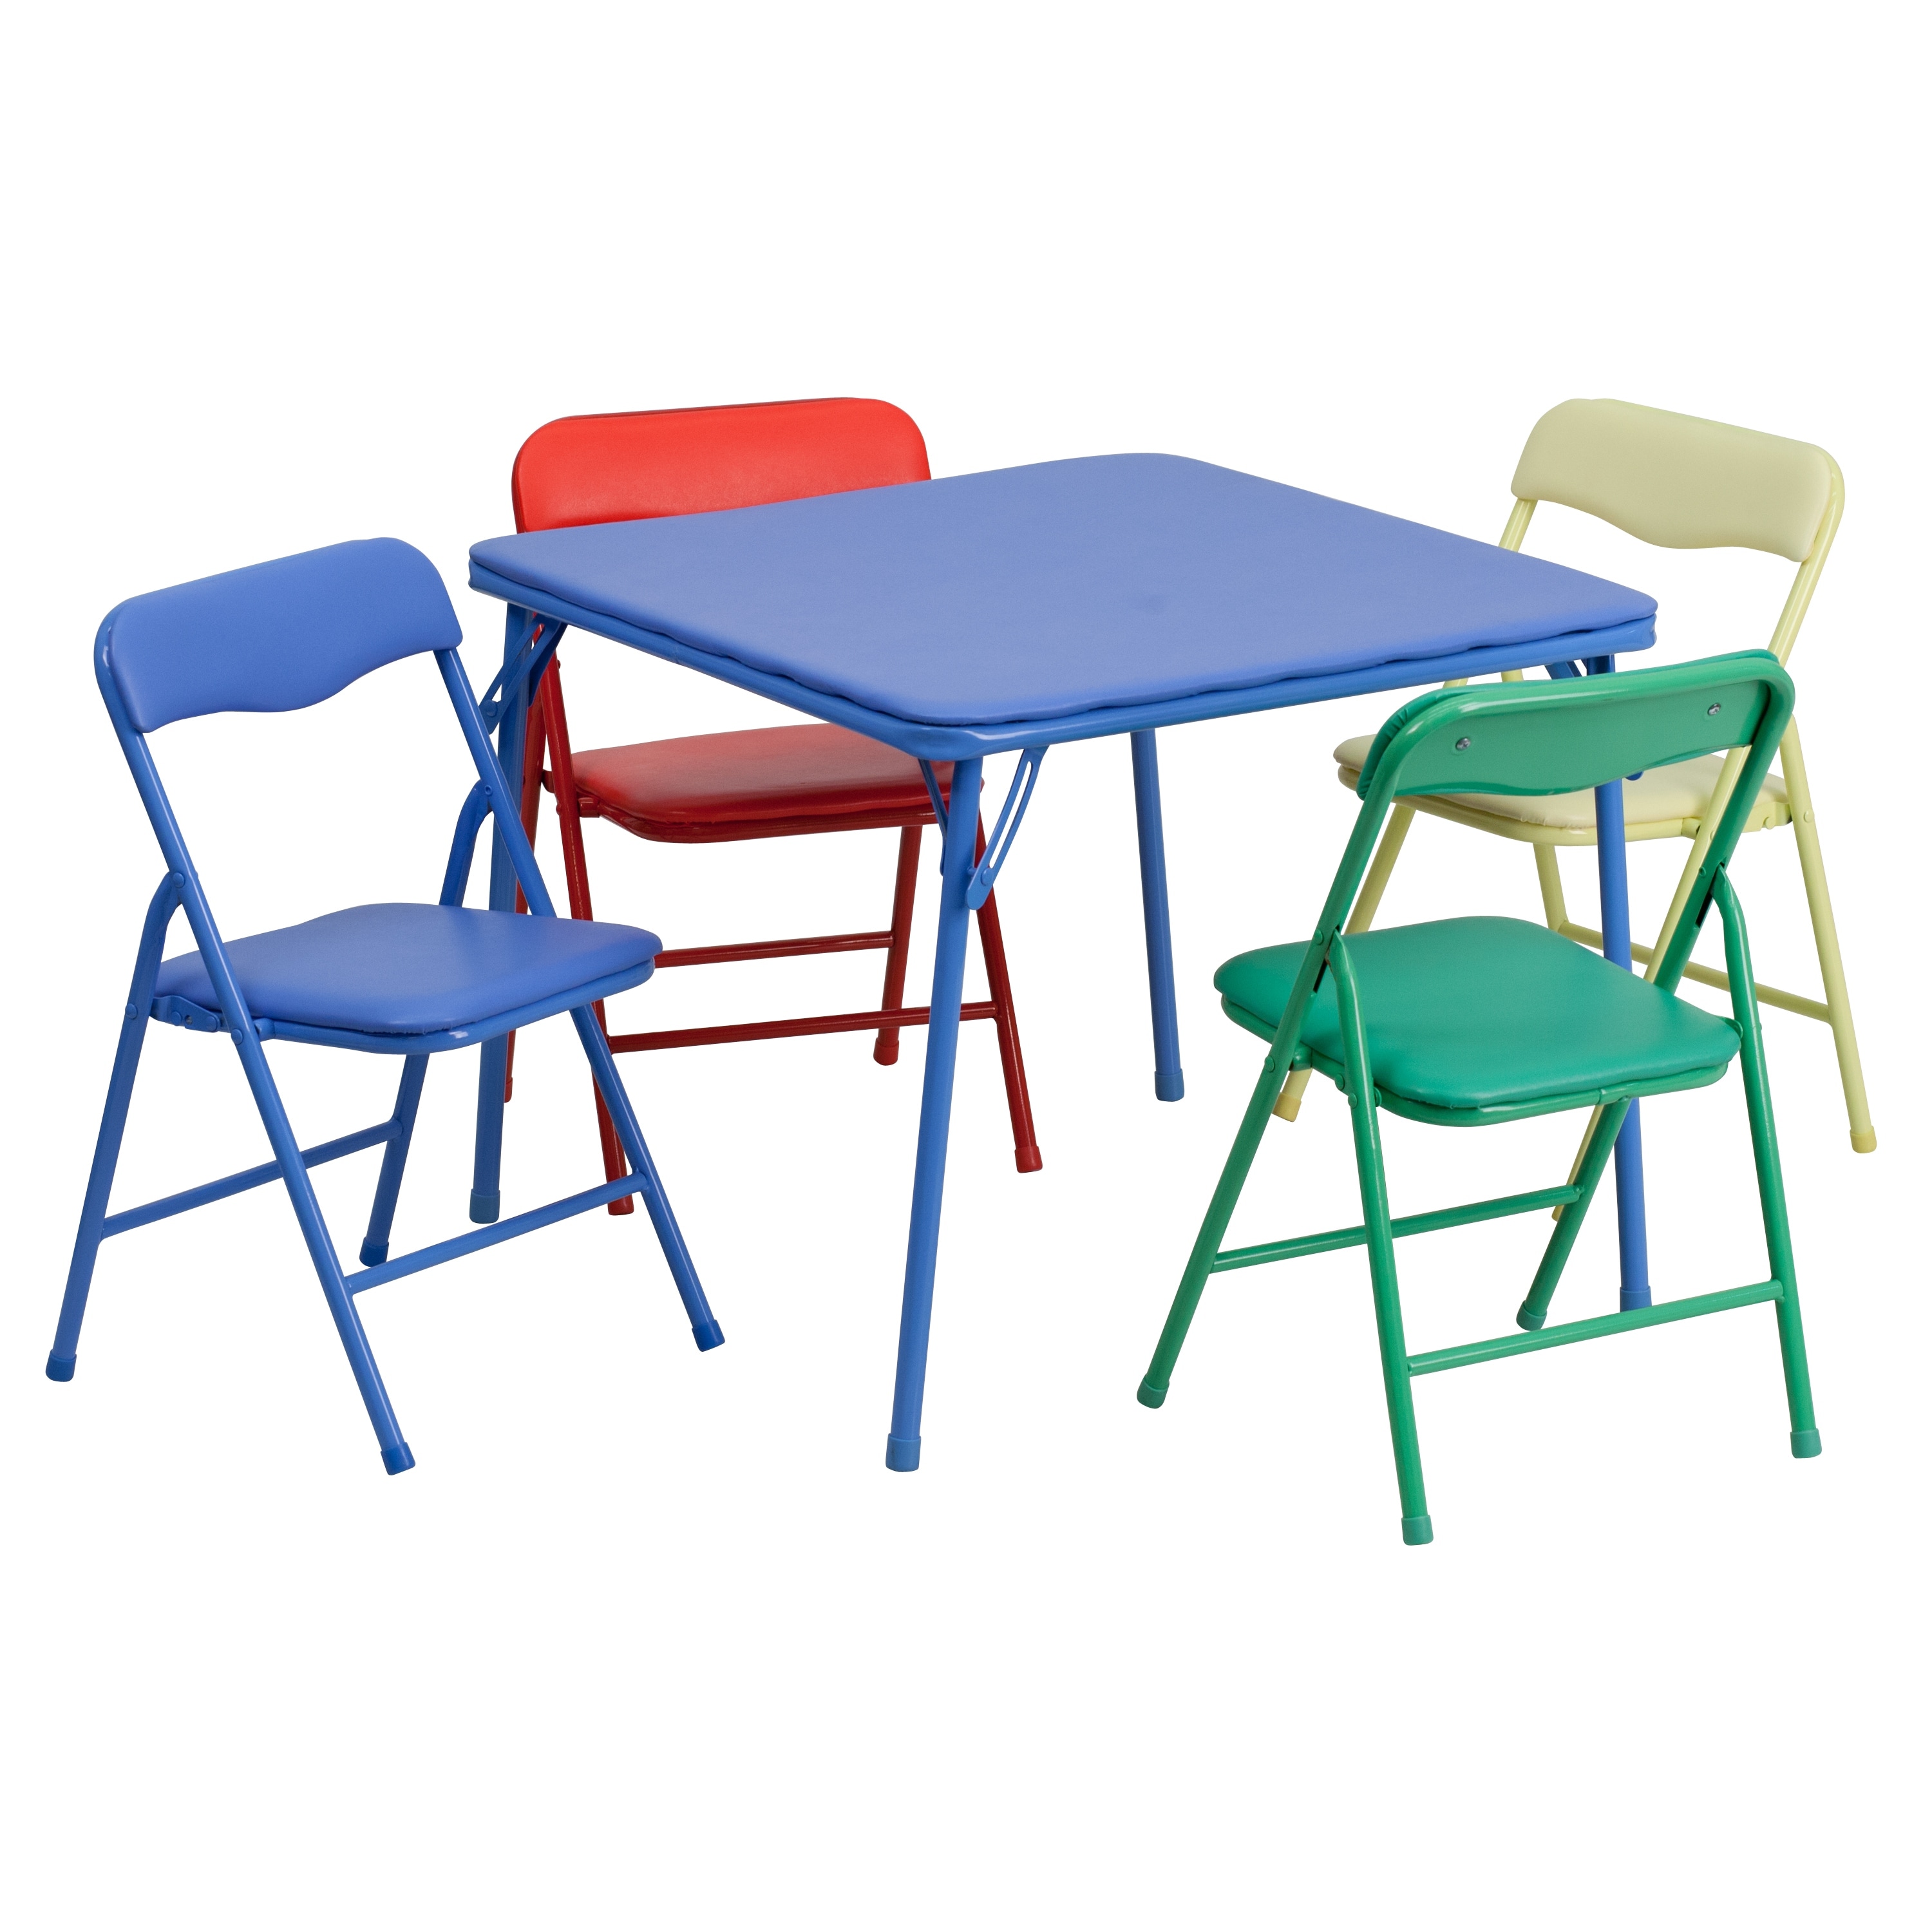 Homework Snack Time Kinfant Kids Wooden Table and Chairs 5 Pieces Set Includes 4 Chairs and 1 Activity Table Ideal for Arts /& Crafts